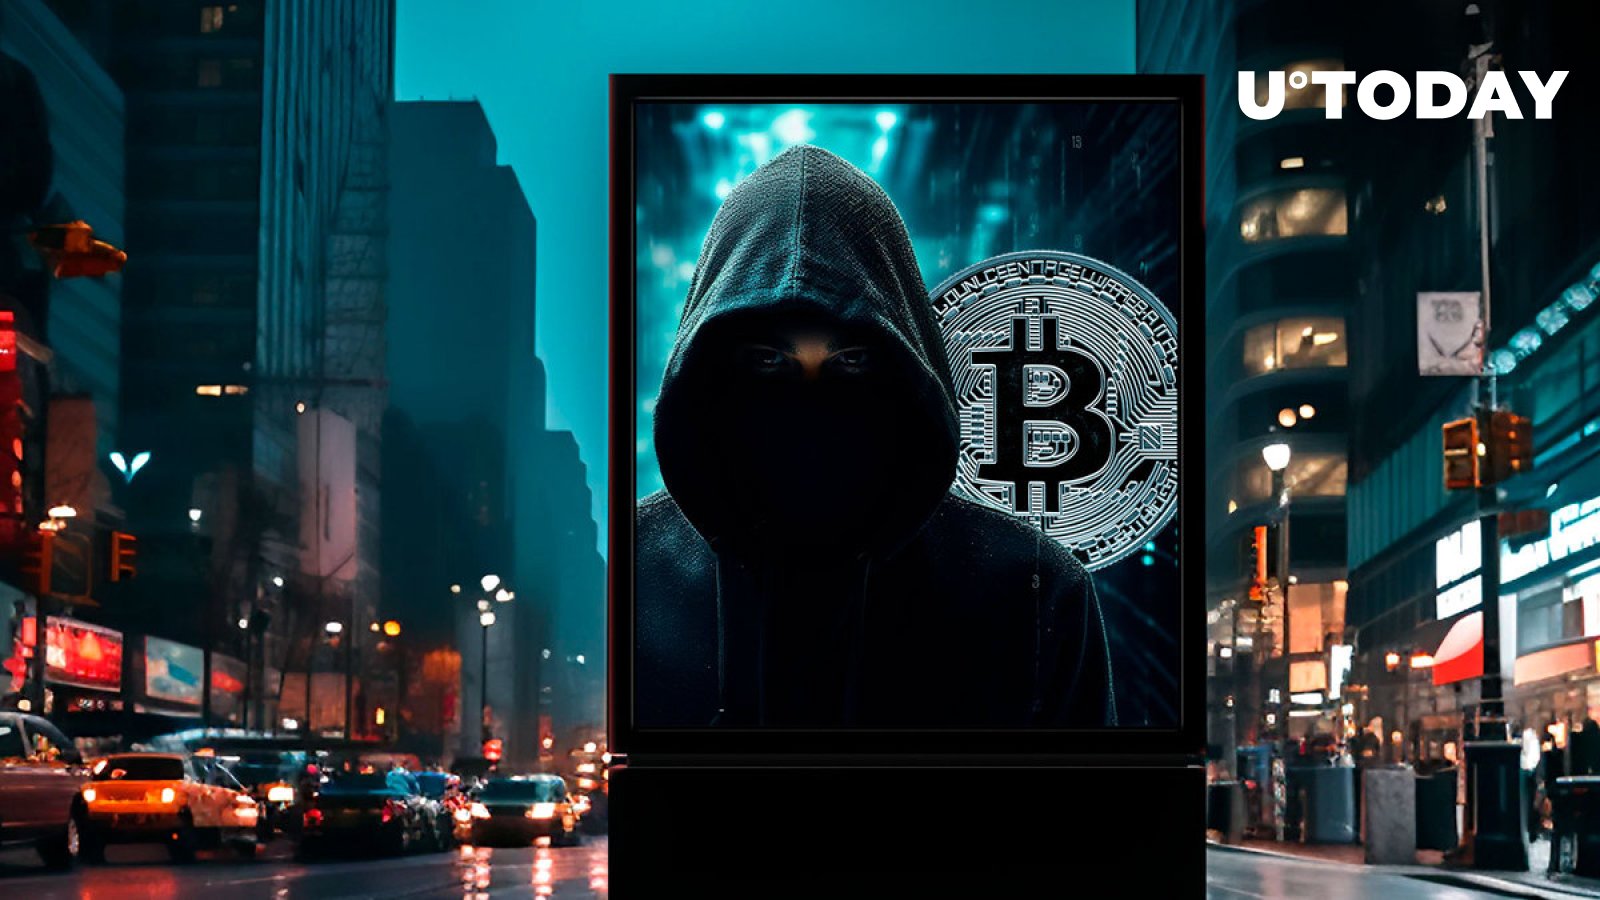 Satoshi Nakamoto ‘Appears’ on Times Square in New York City